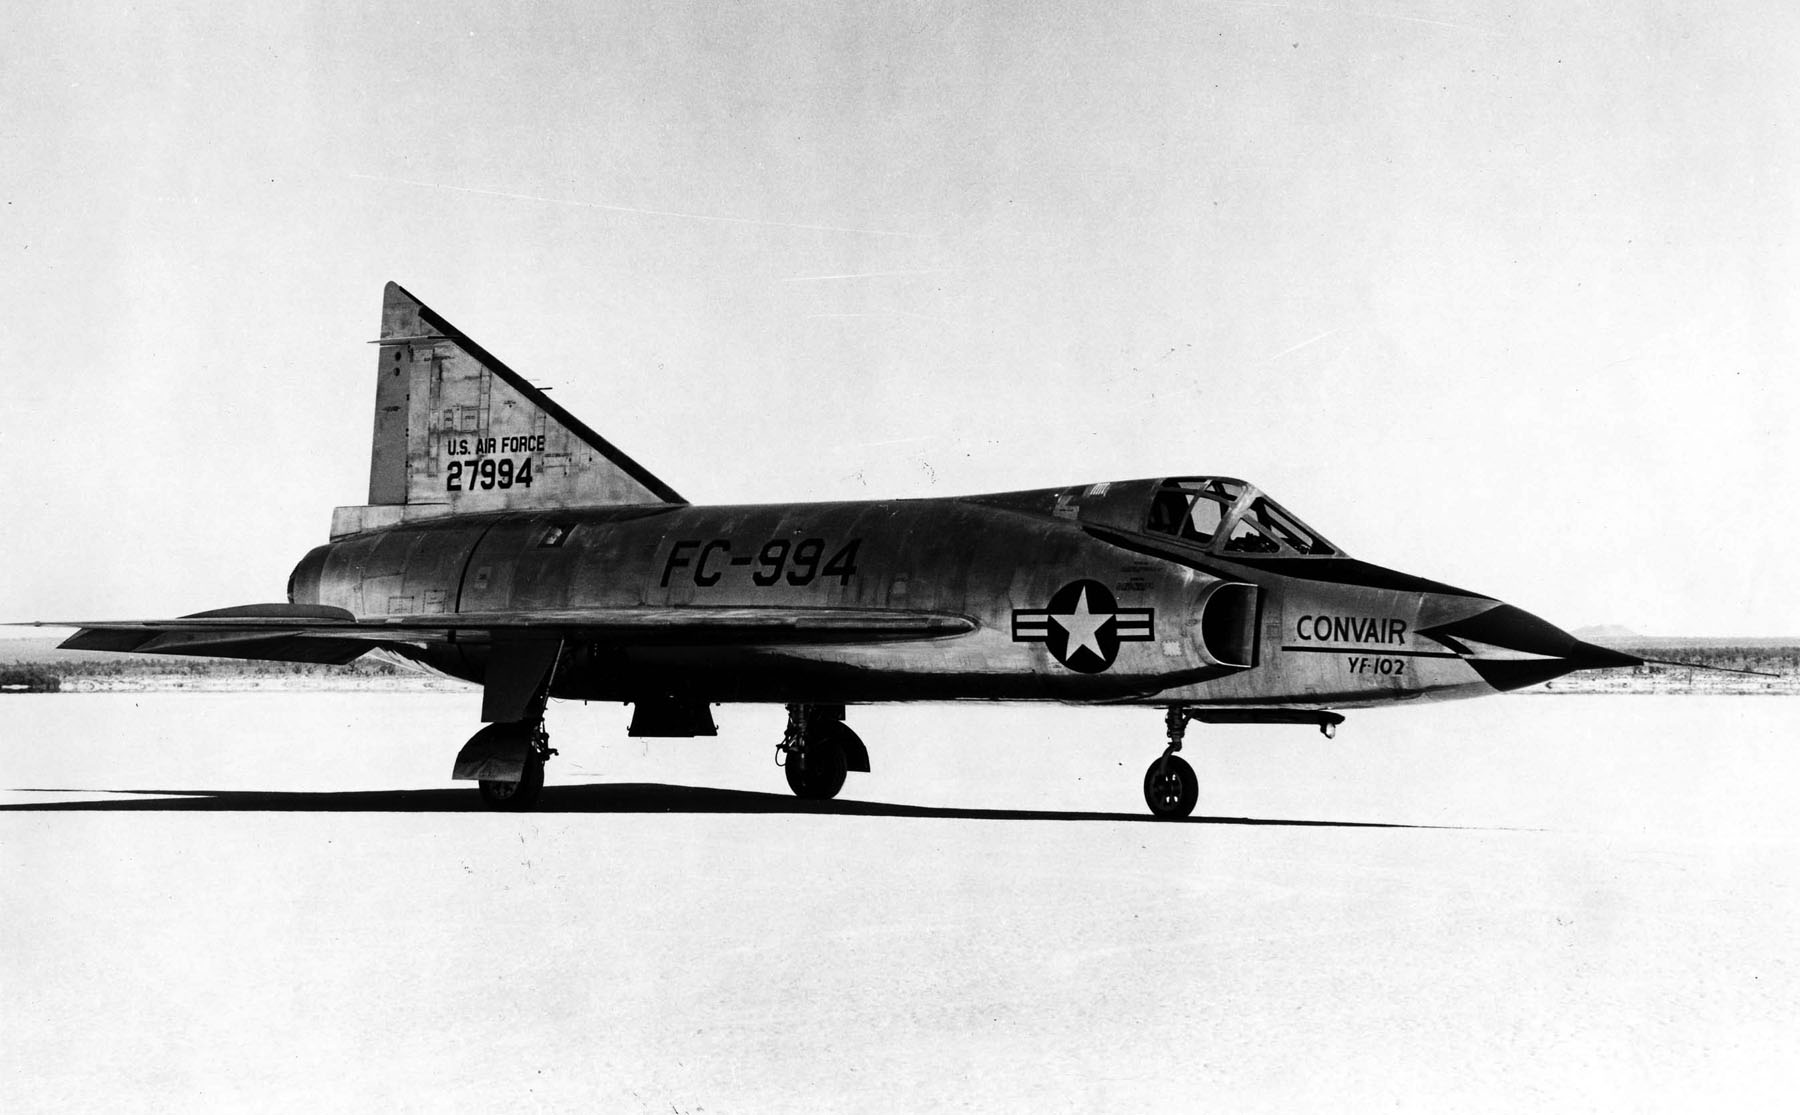 The first prototype Convair YF-102 Delta Dagger, 52-7994, on Rogers Dry Lake, October 1953. (U.S. Air Force)